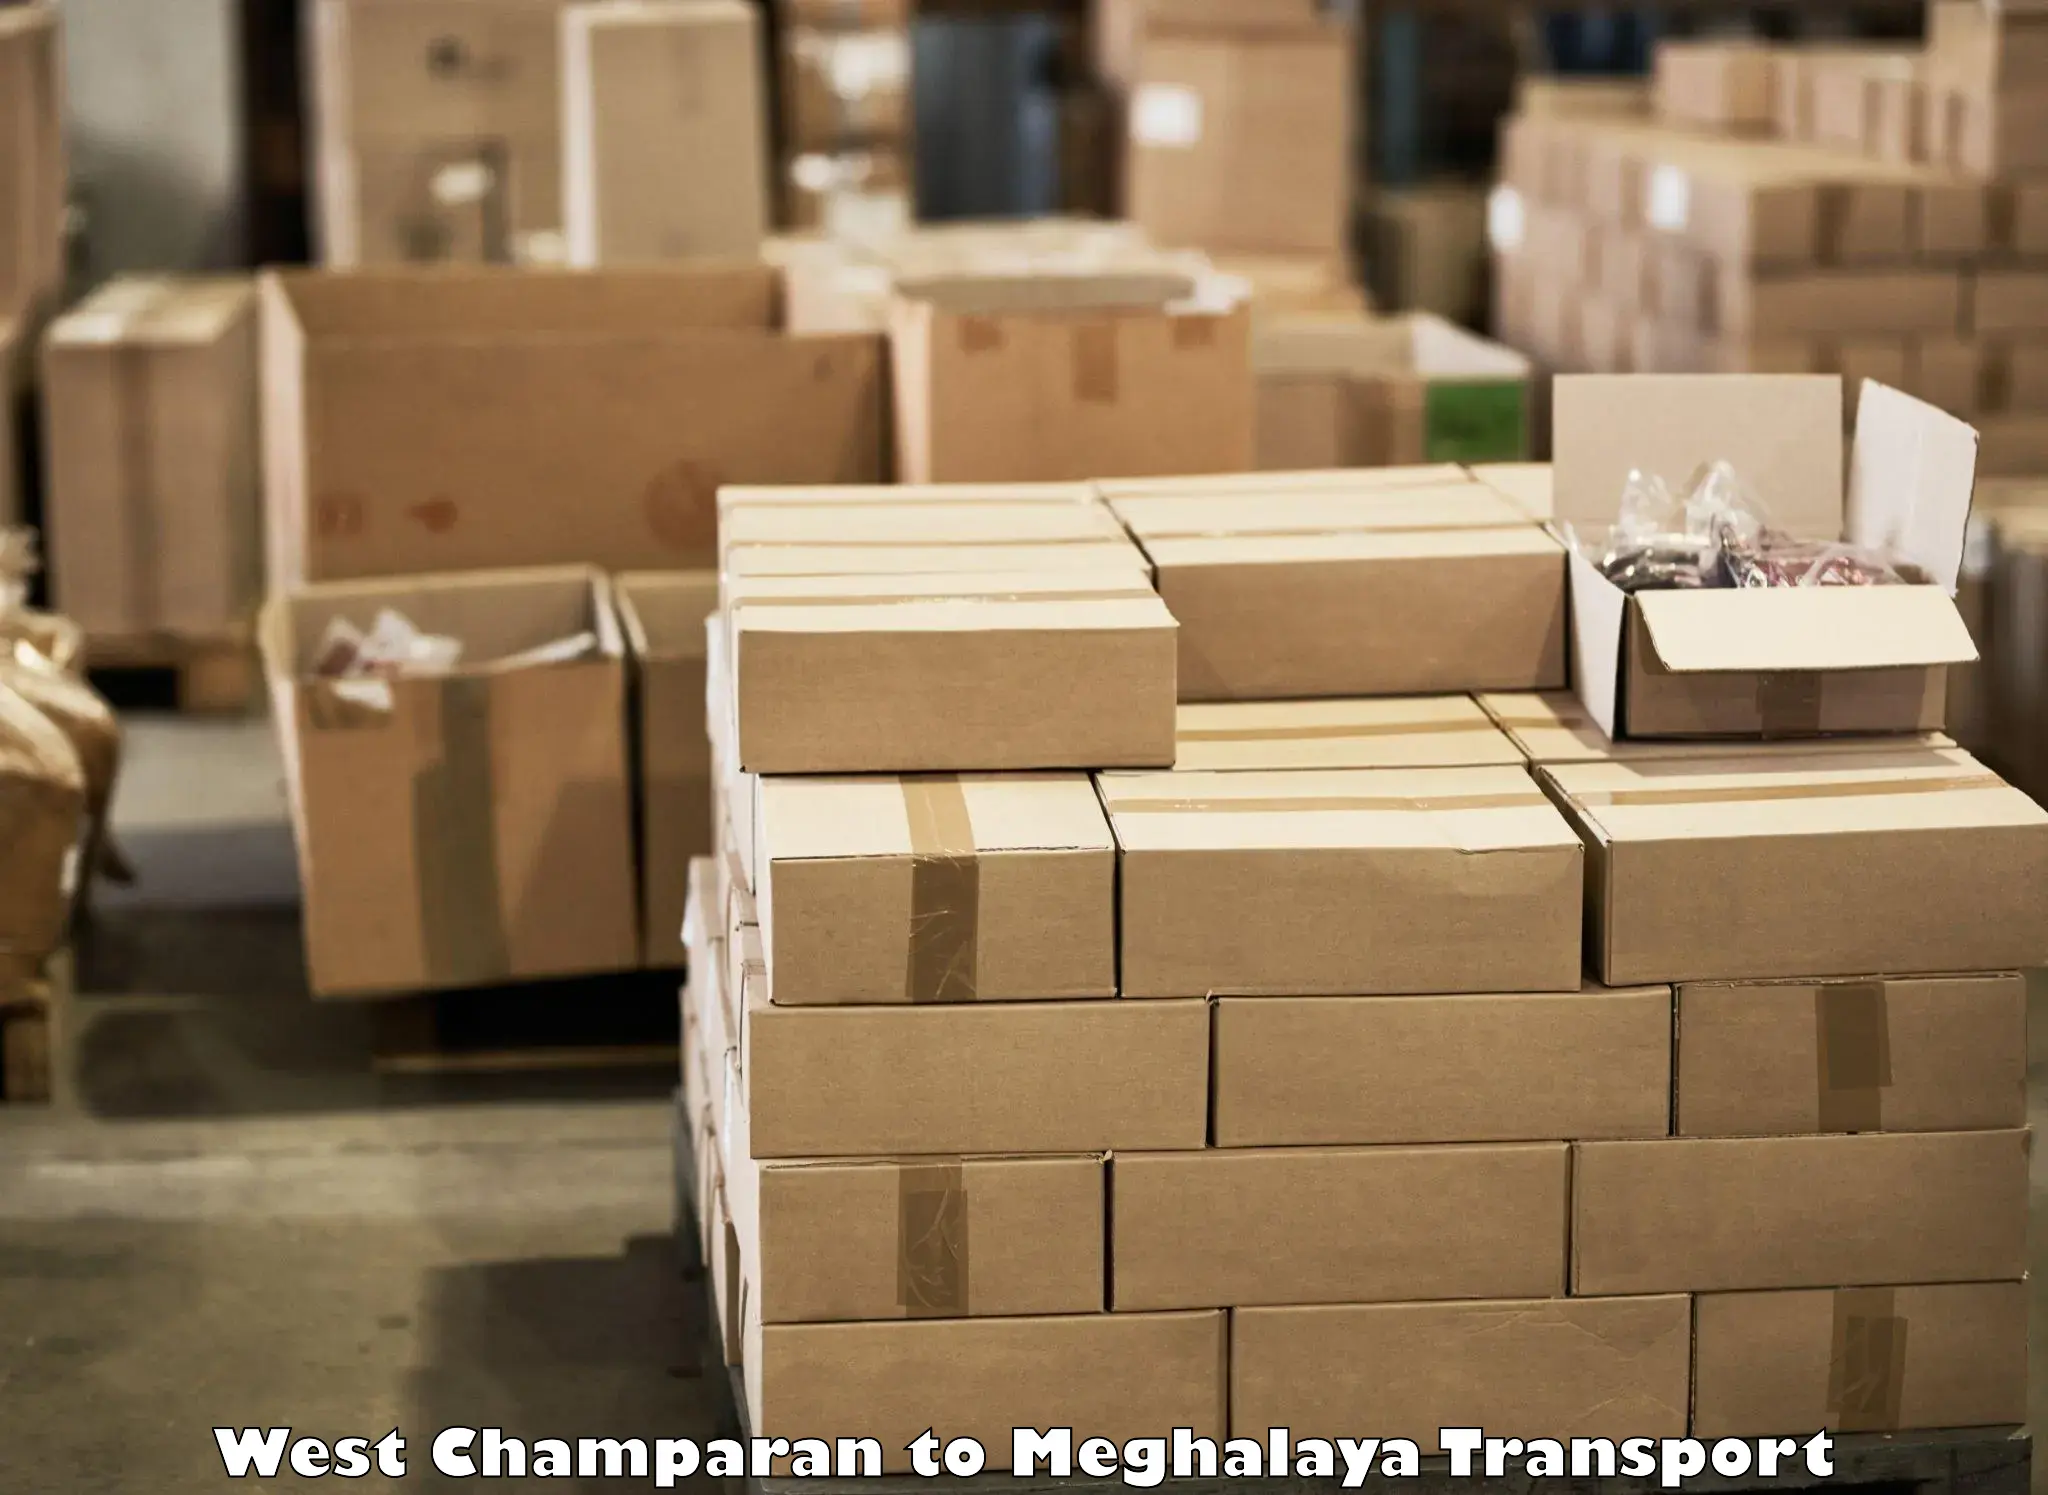 Daily parcel service transport West Champaran to Tikrikilla